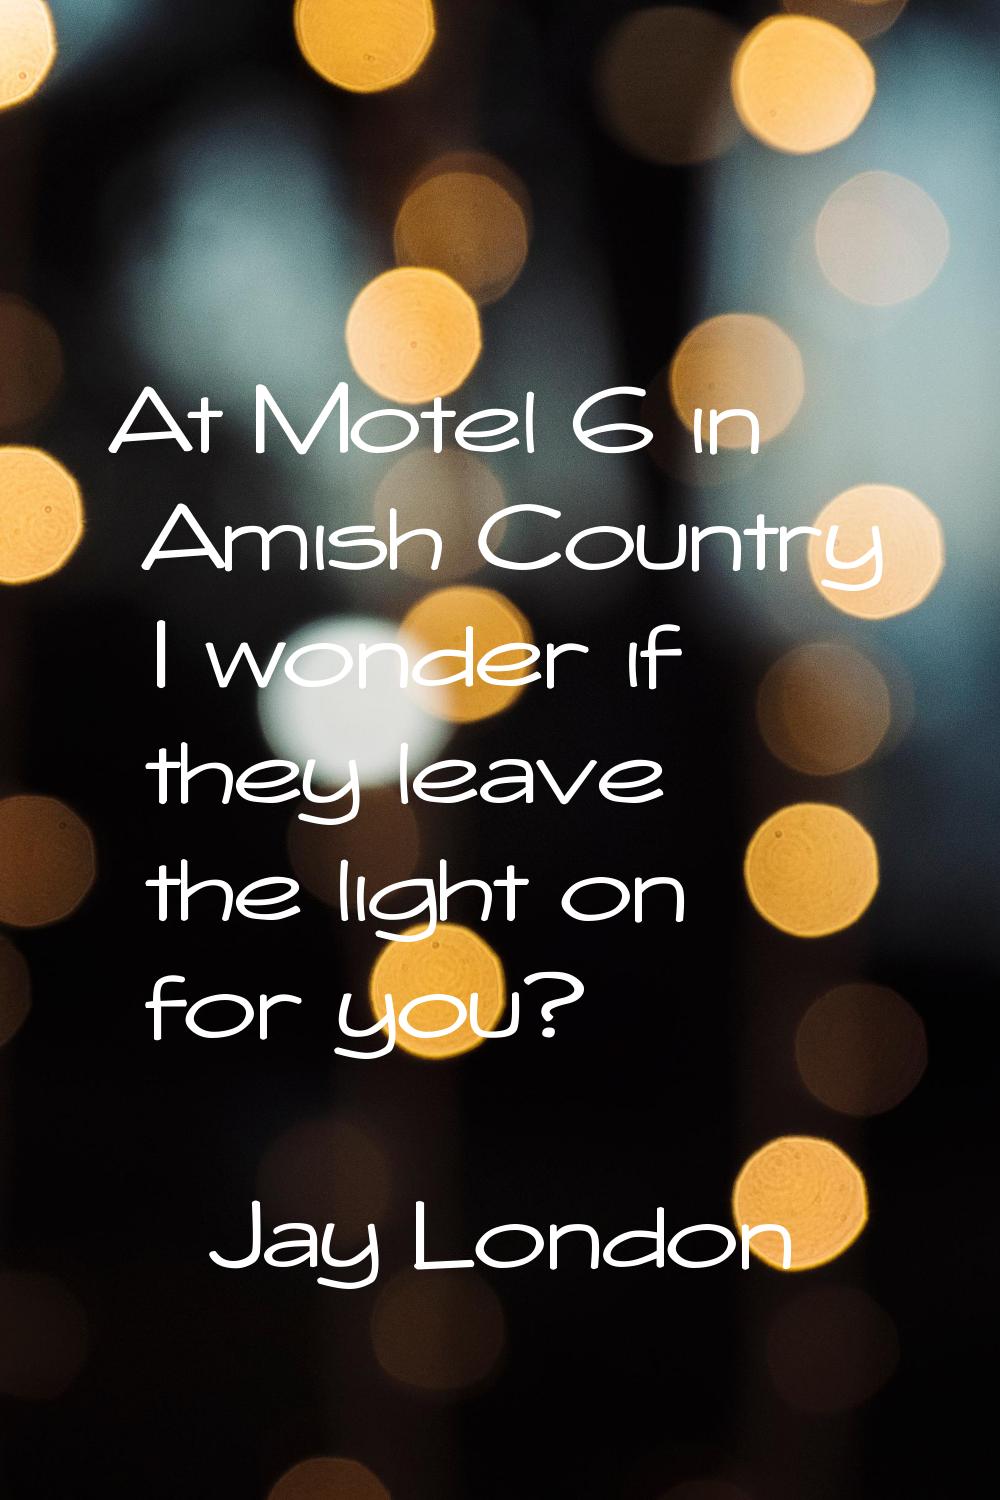 At Motel 6 in Amish Country I wonder if they leave the light on for you?